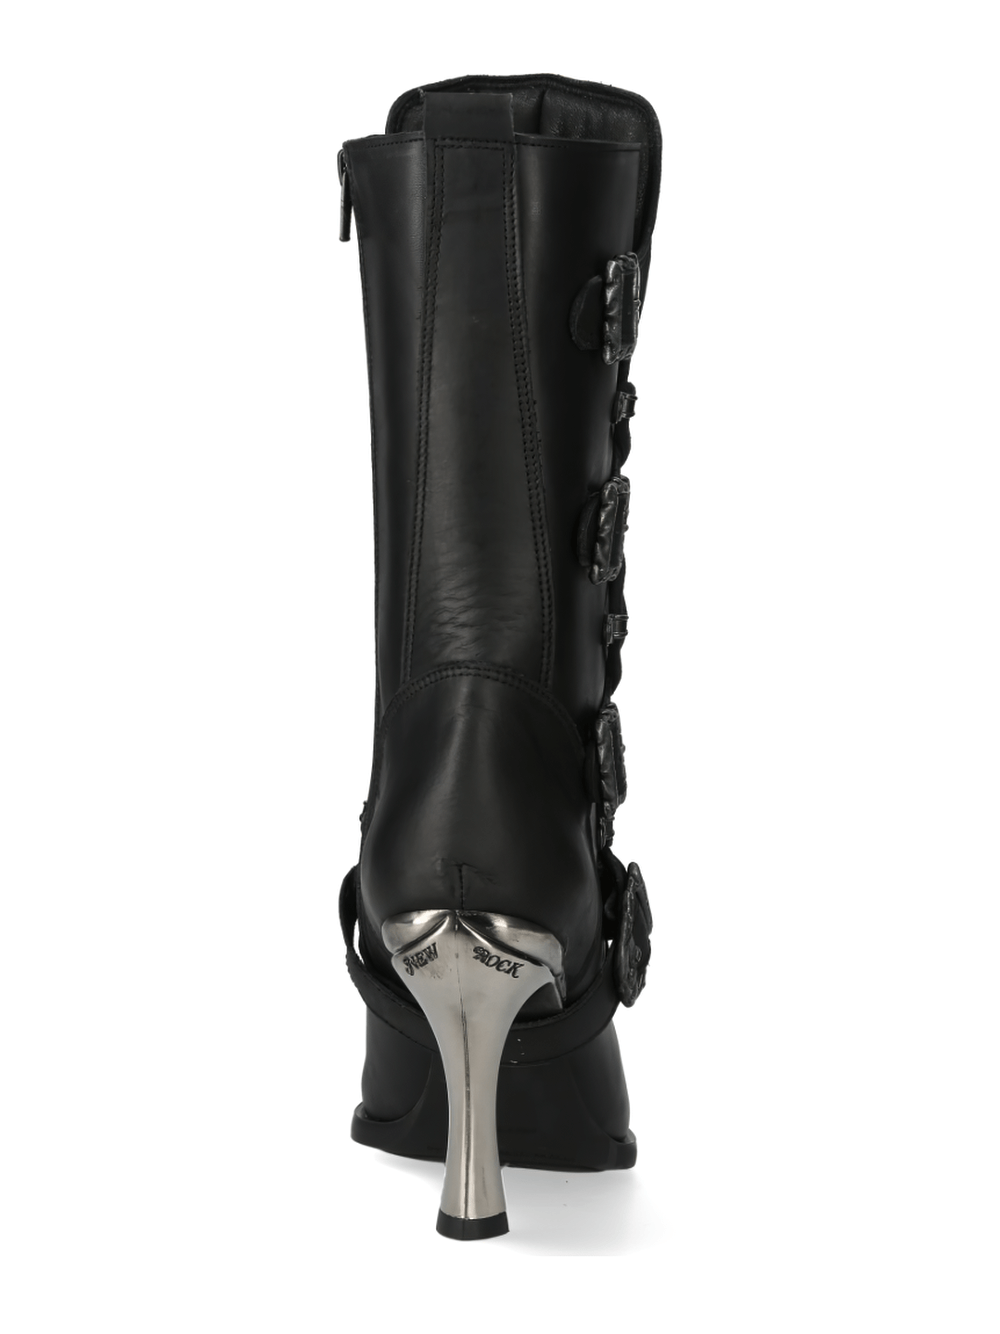 NEW ROCK Urban Gothic High-Heeled Lace-Up Boots